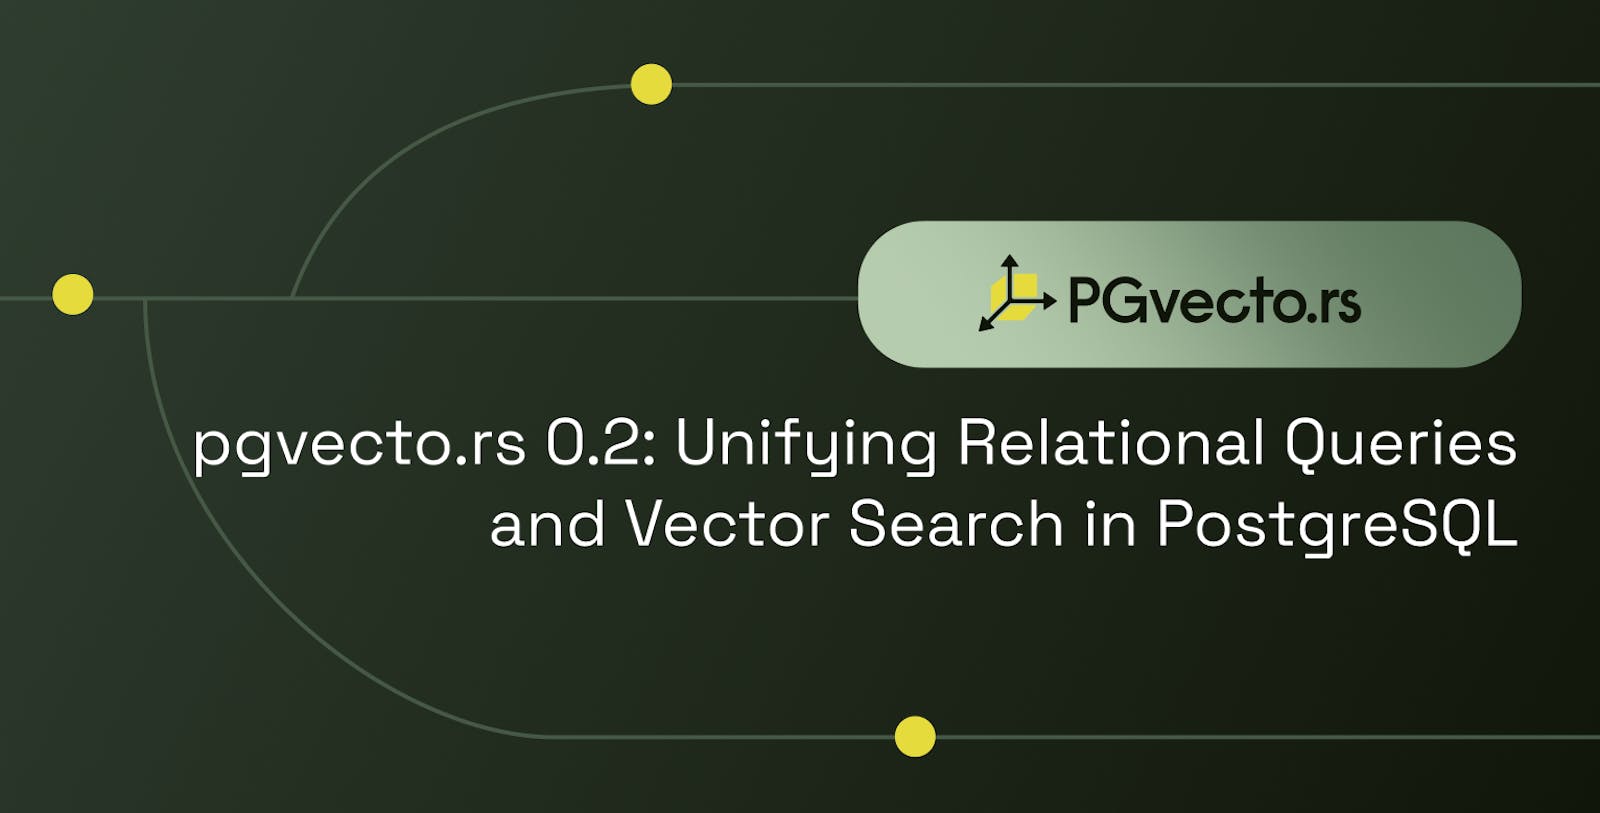 pgvecto.rs 0.2: Unifying Relational Queries and Vector Search in PostgreSQL